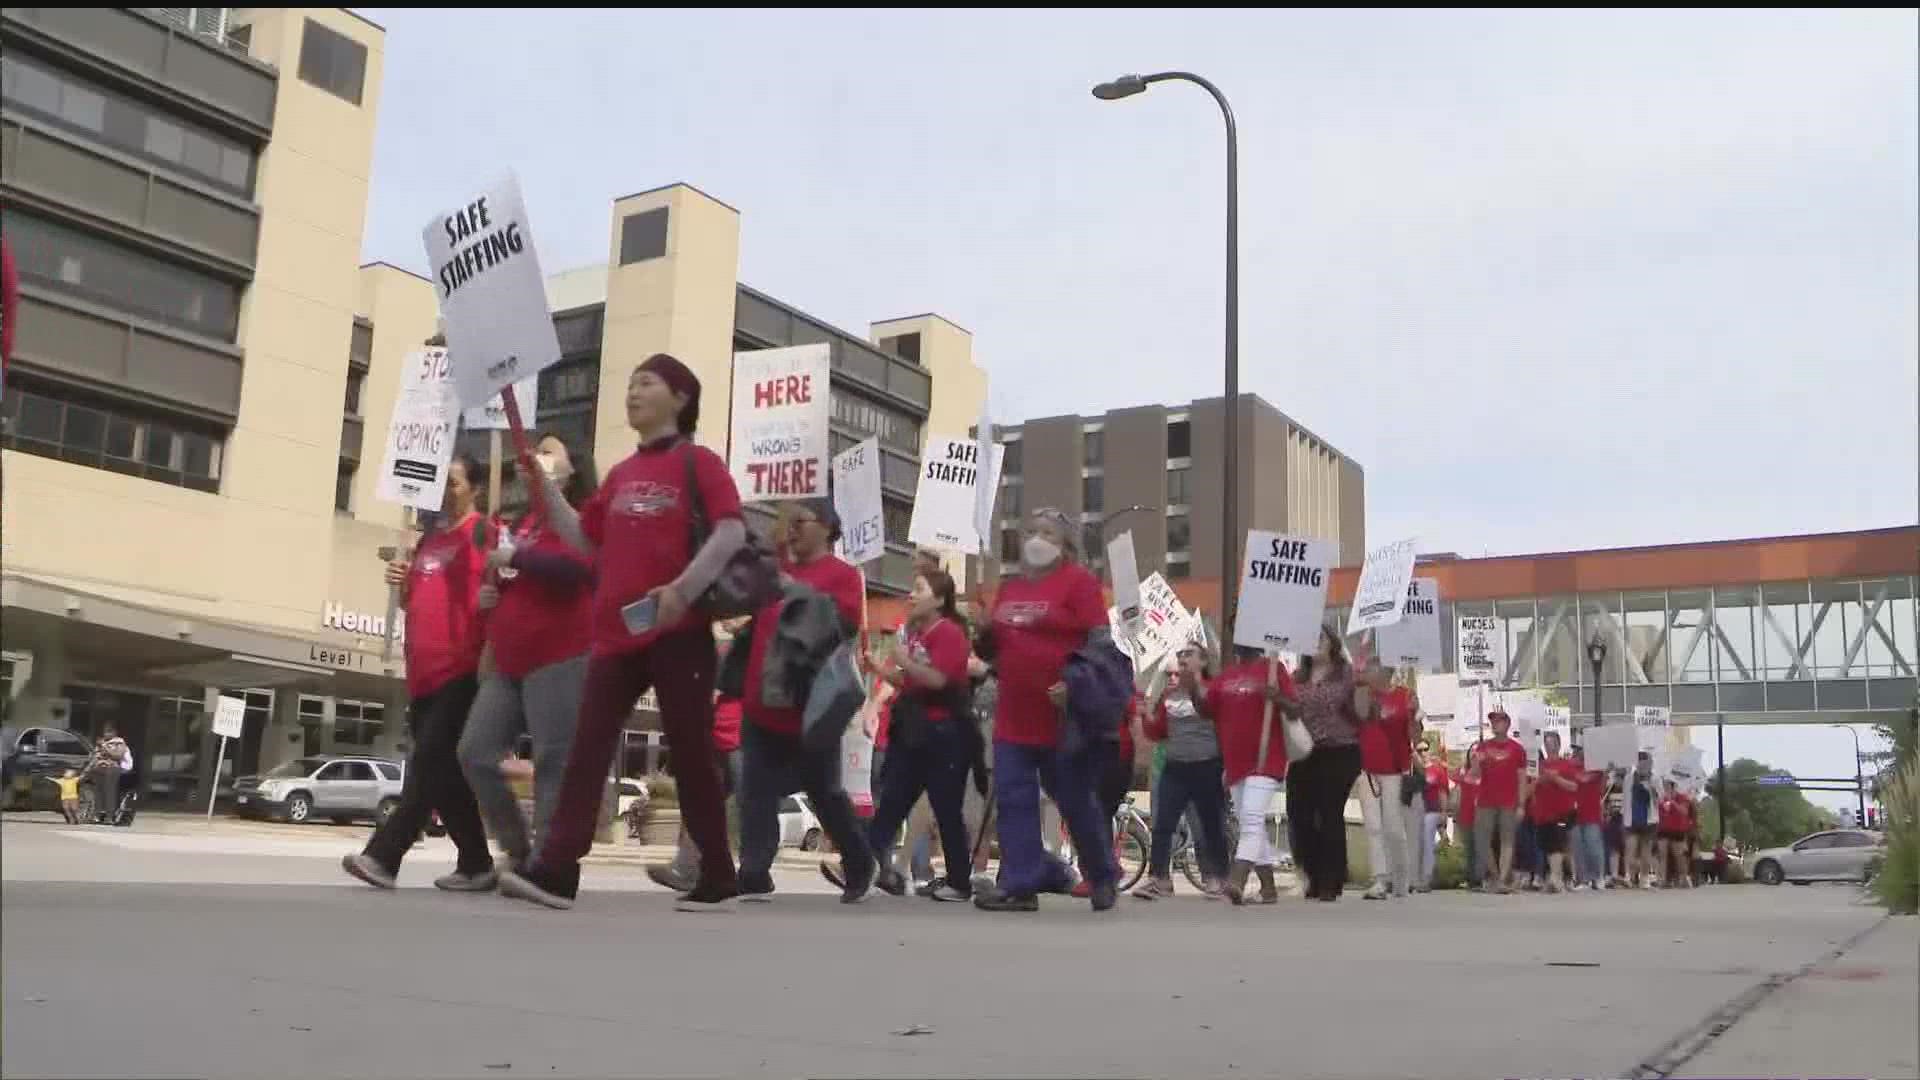 The latest negotiations come after months of back and forth on new contracts between the Minnesota Nurses Association and several hospital groups.